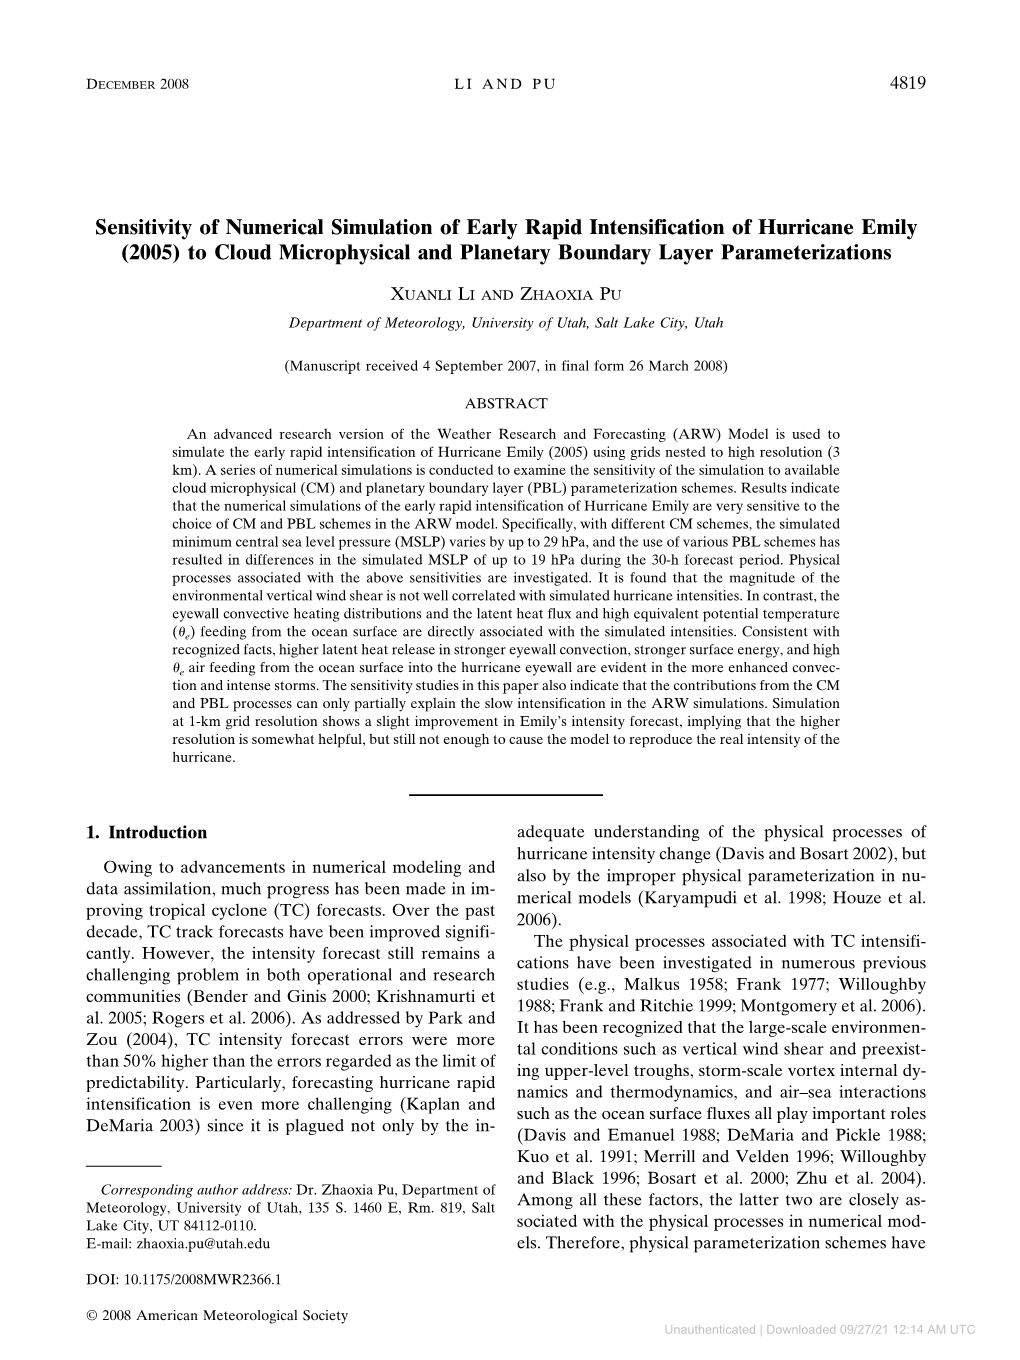 Sensitivity of Numerical Simulation of Early Rapid Intensification of Hurricane Emily (2005) to Cloud Microphysical and Planetary Boundary Layer Parameterizations